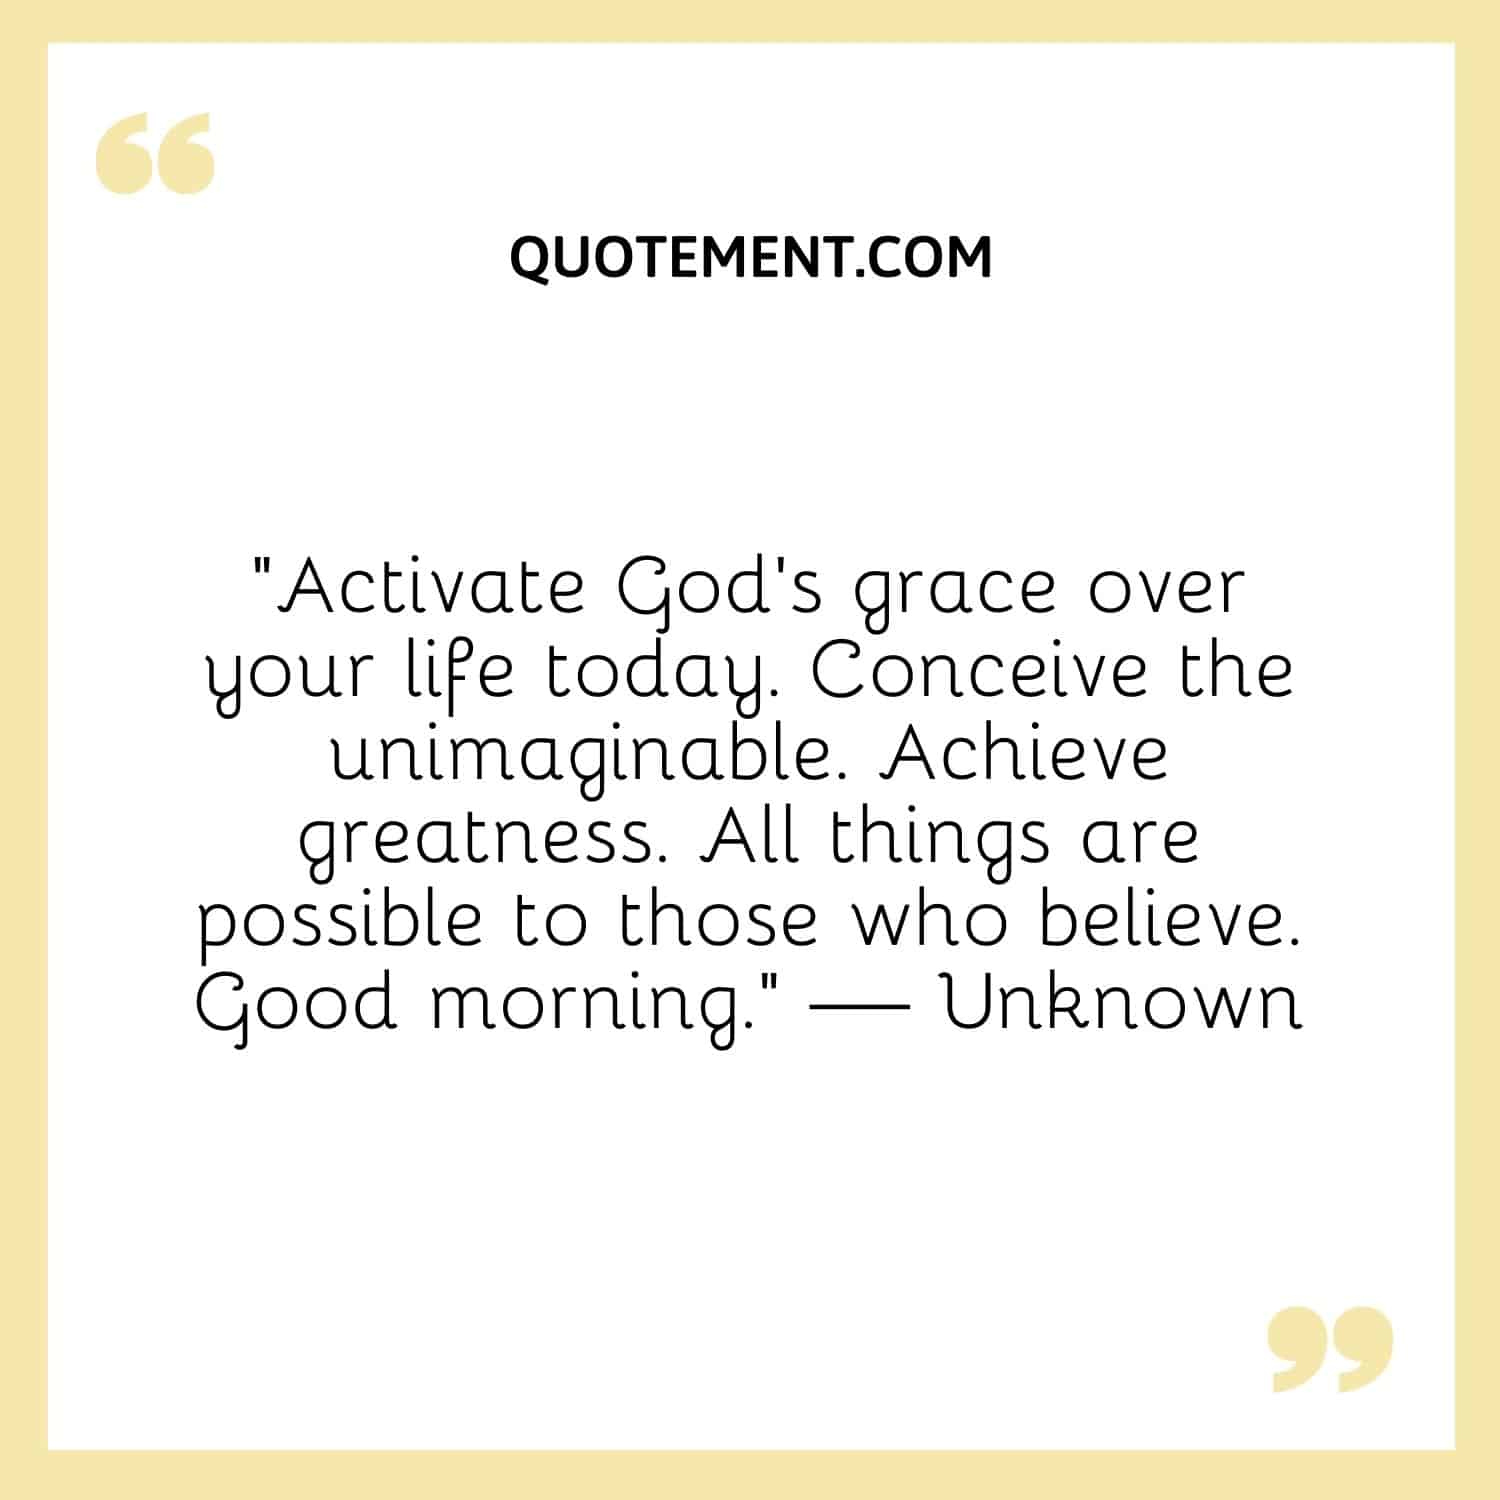 Activate God’s grace over your life today